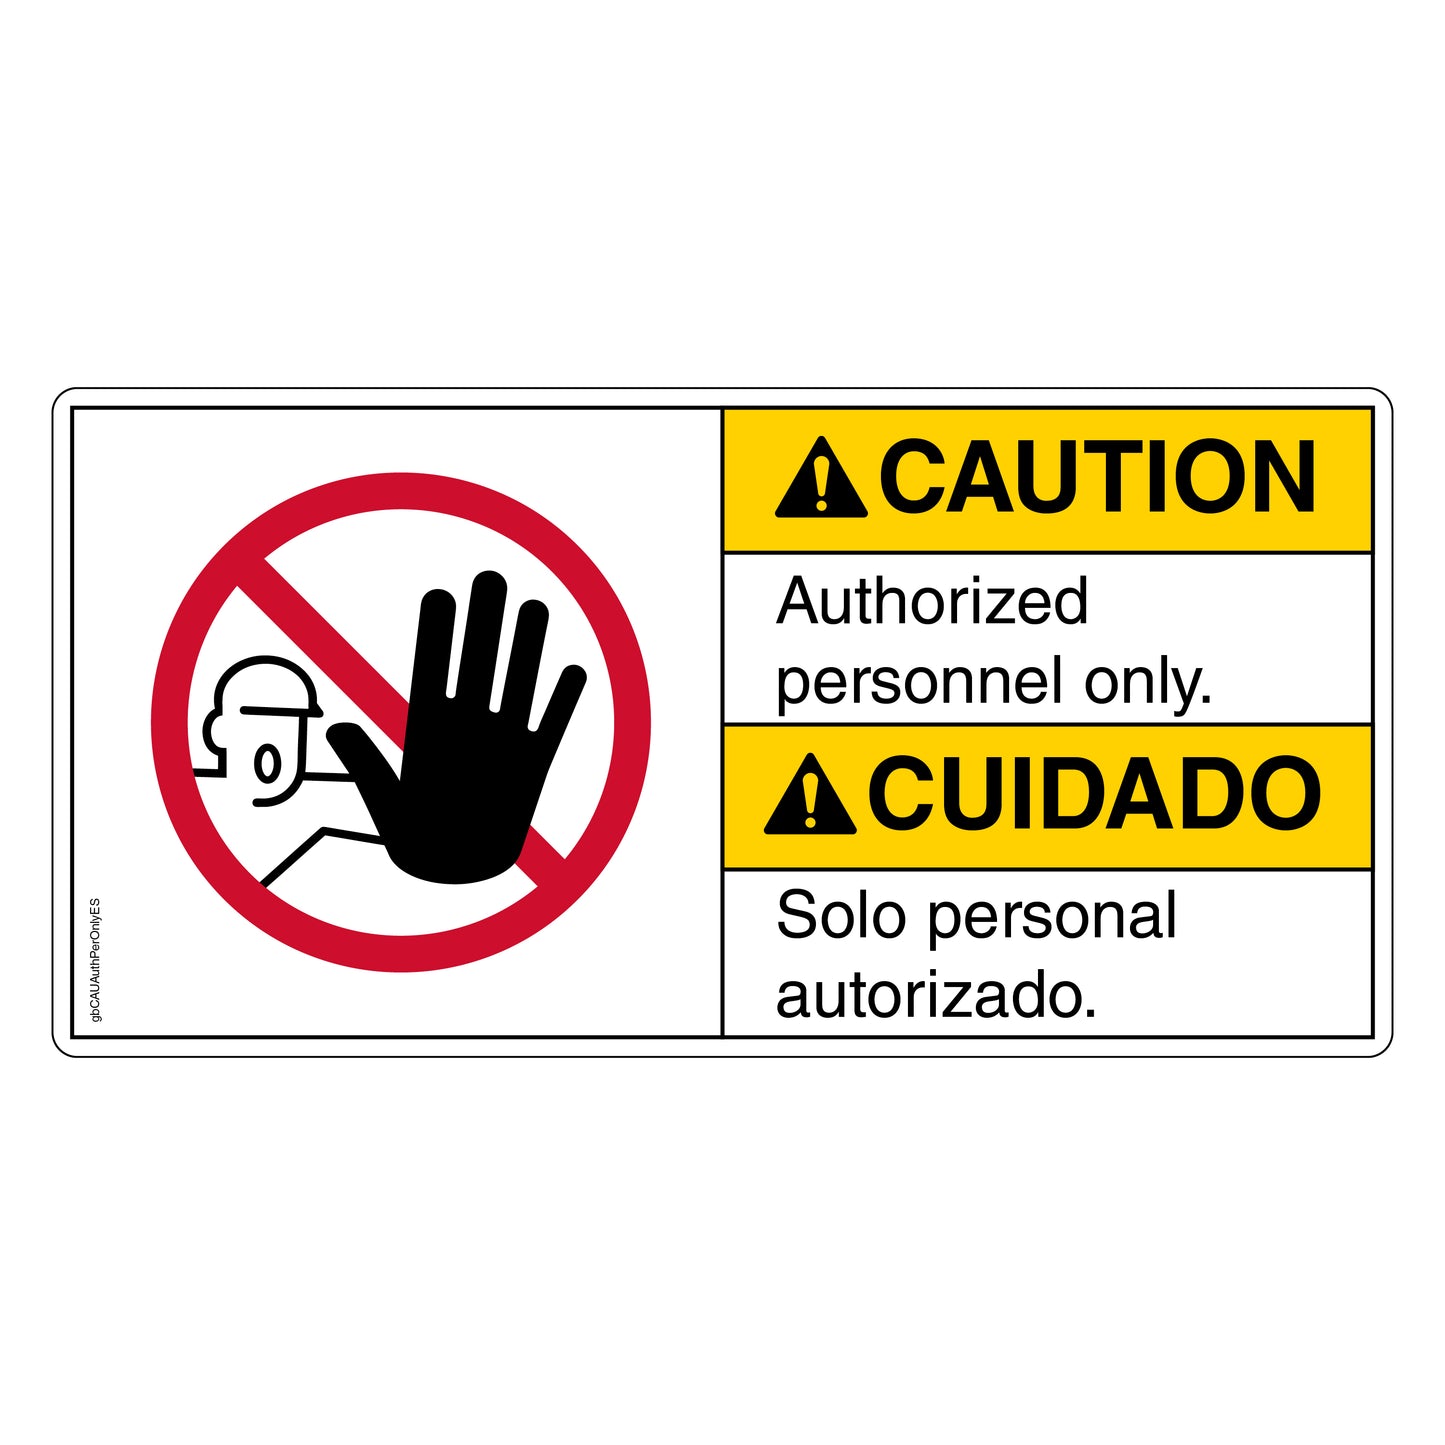 Caution Authorized Personnel Only Decal in English and Spanish. 